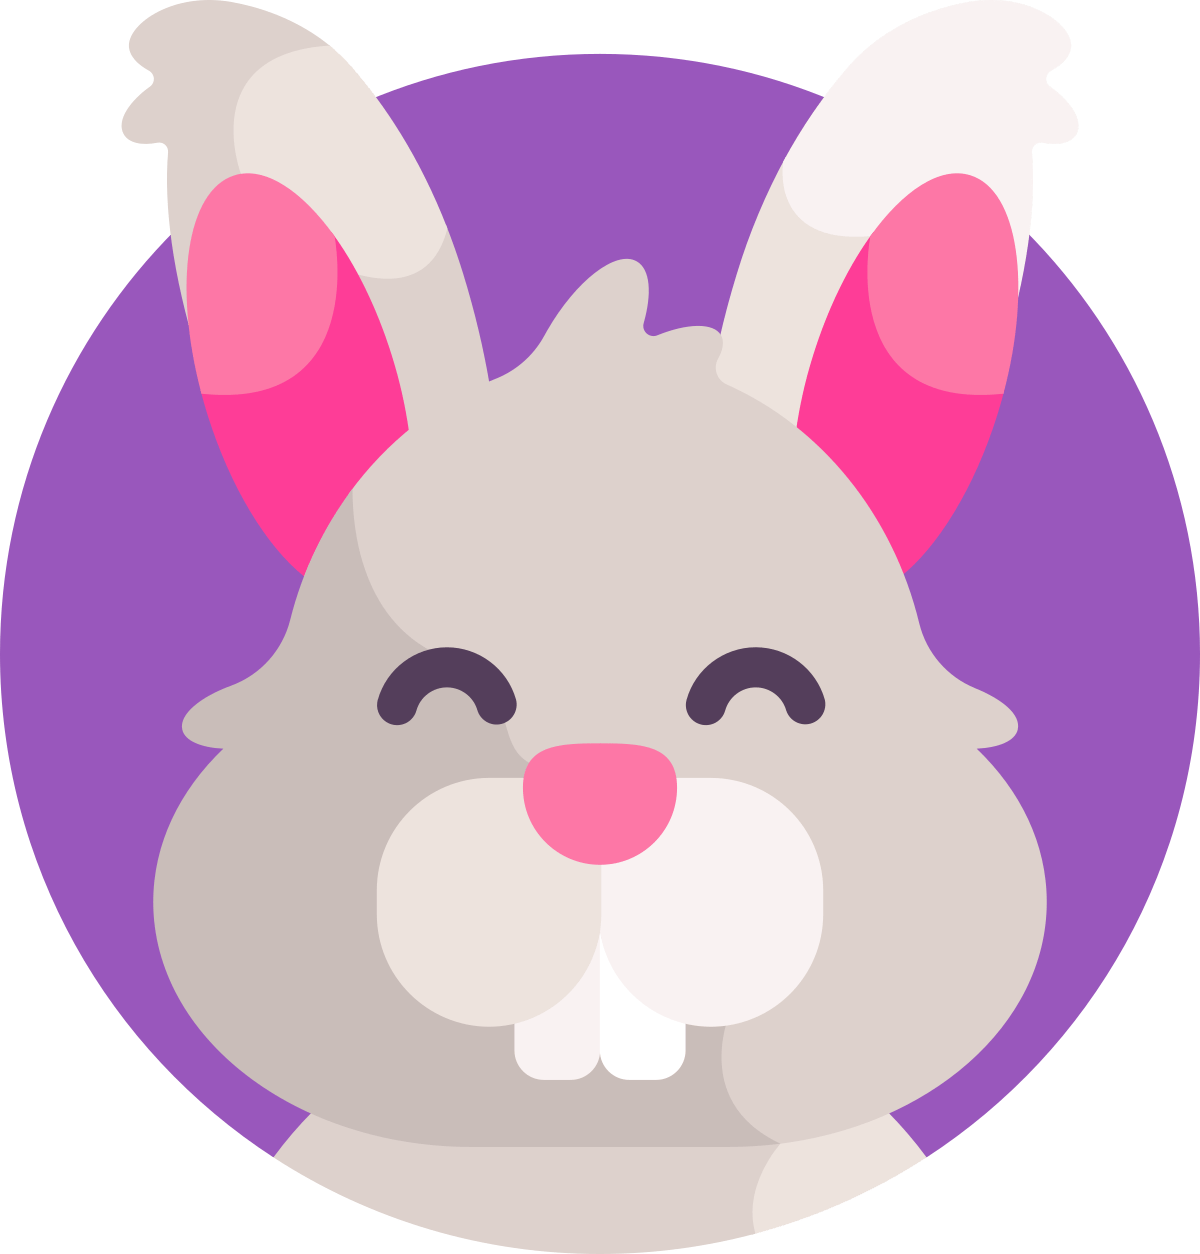 The Chinese horoscope for Rabbit